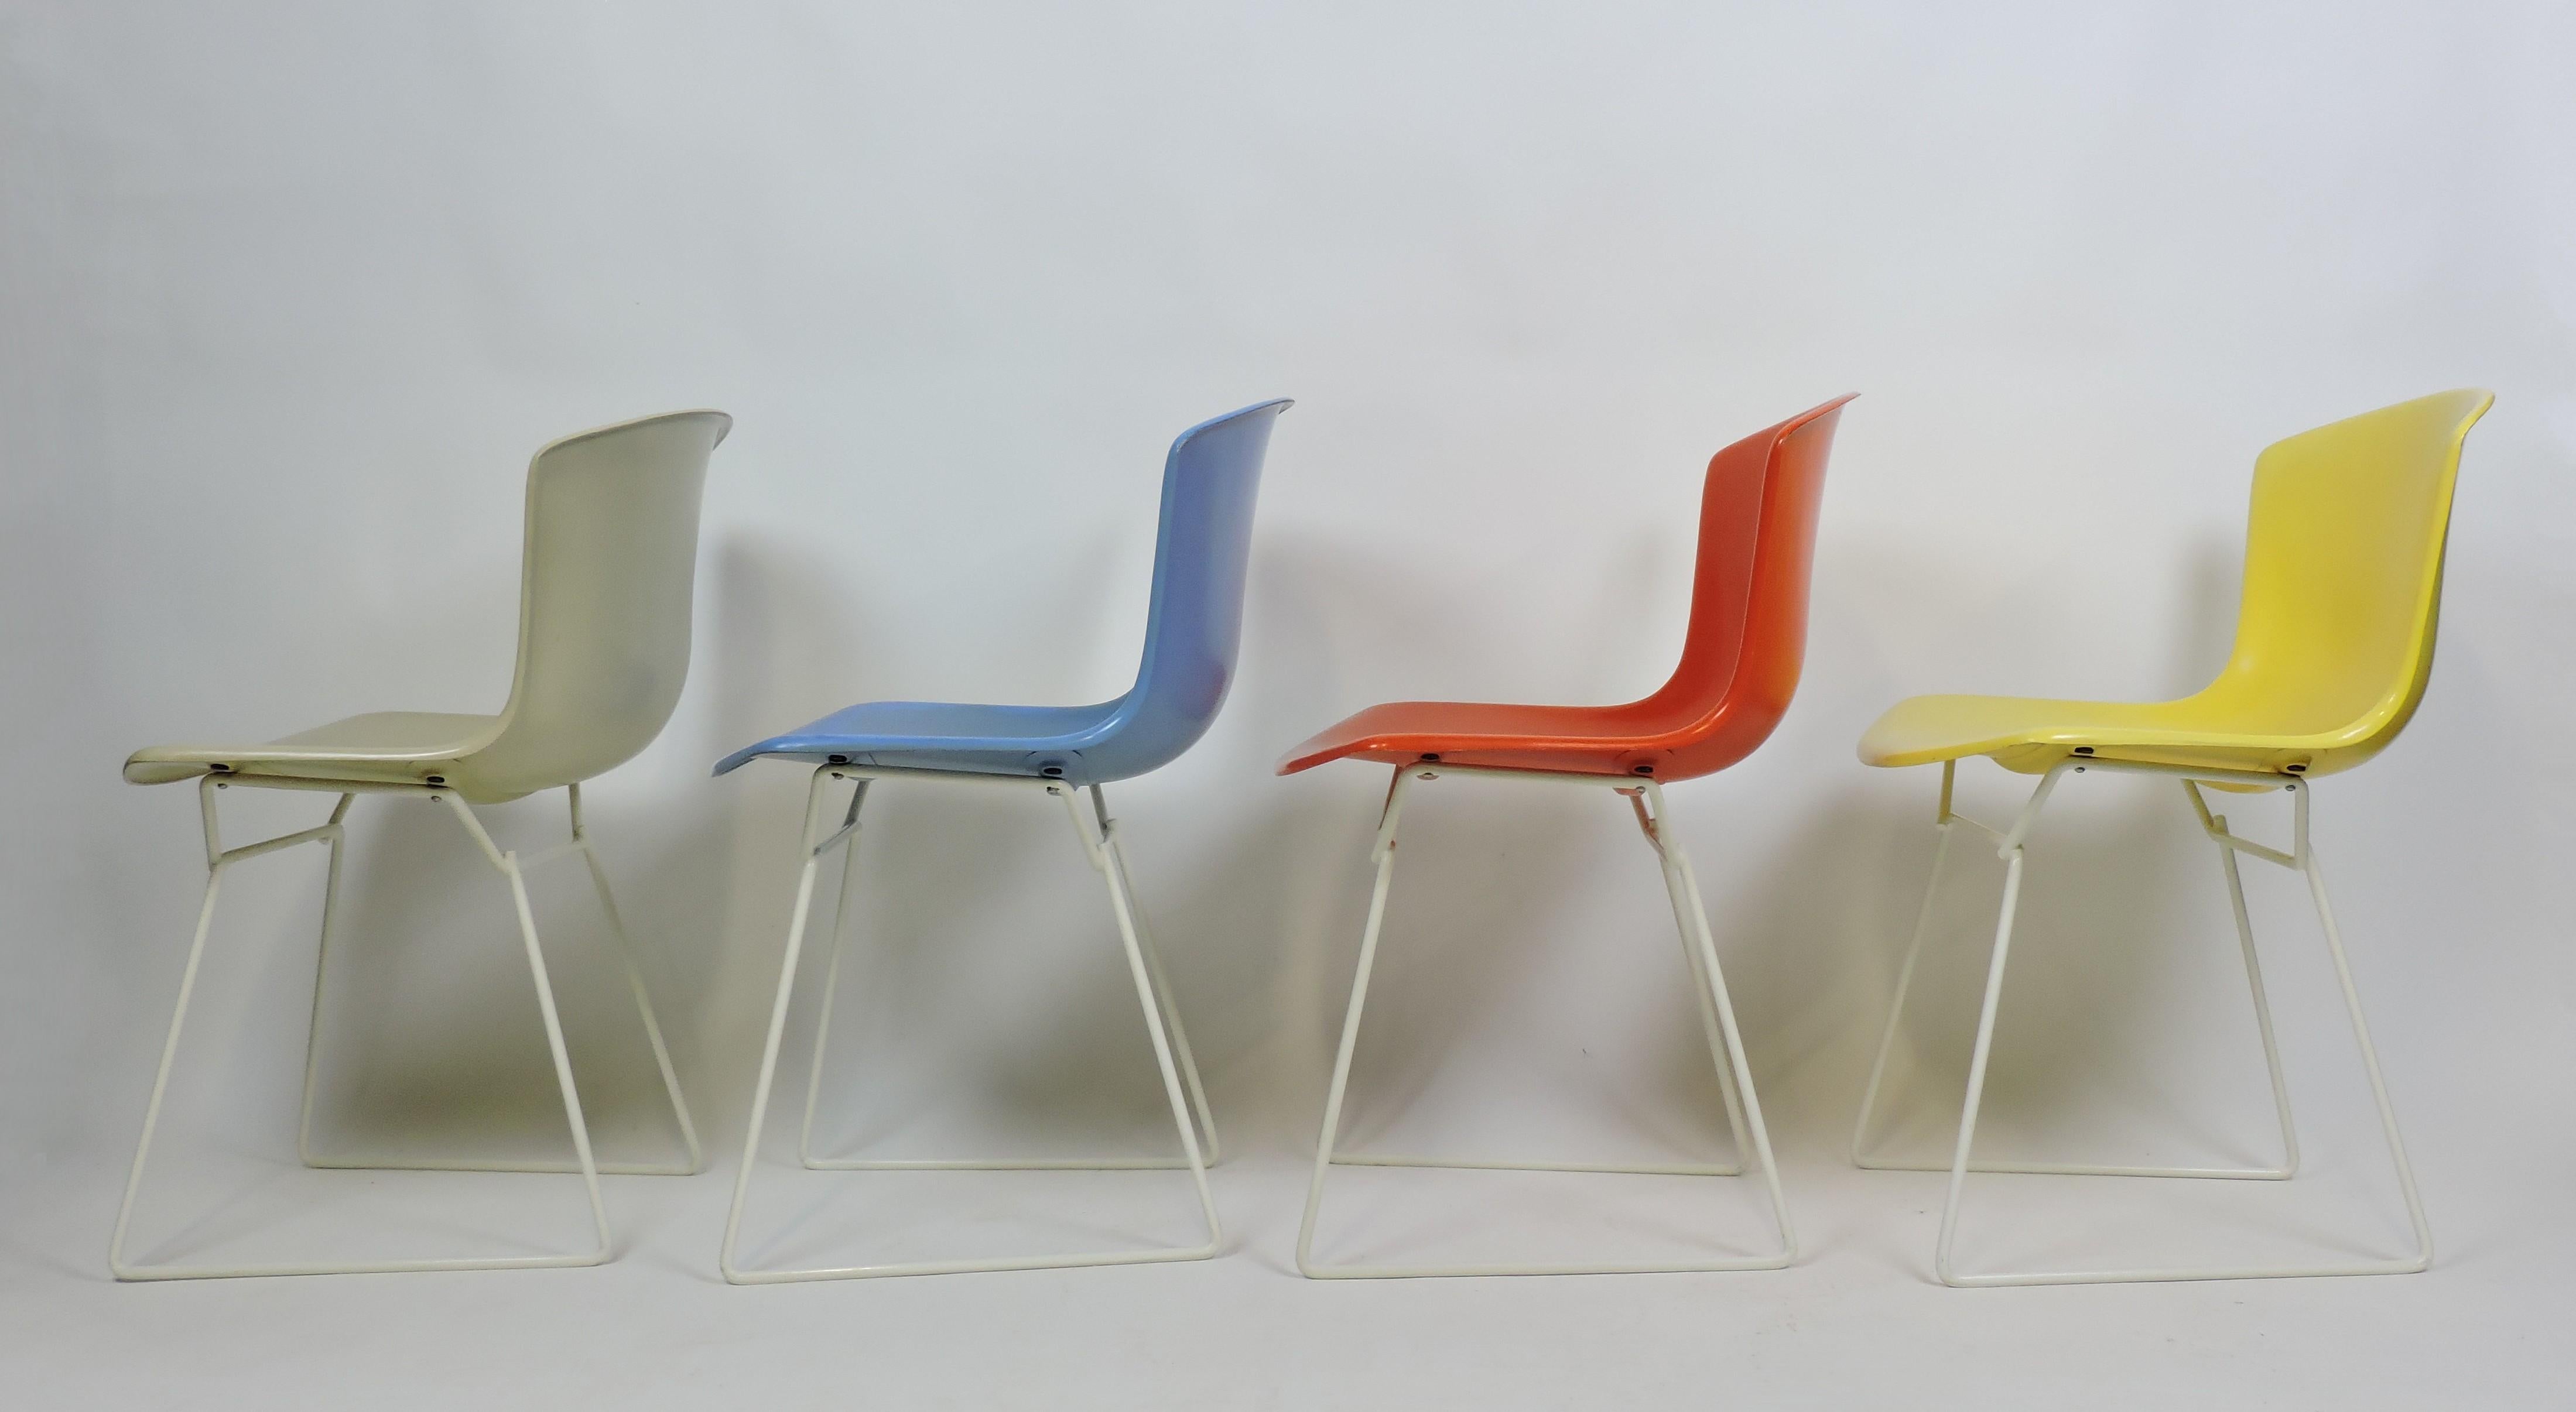 Set of four molded shell side chairs designed by Harry Bertoia and manufactured by Knoll. Originally debuted in 1960, this very early set is from 1963 and includes four colors - beige, blue, red, yellow - on a white frame for a colorful and fun